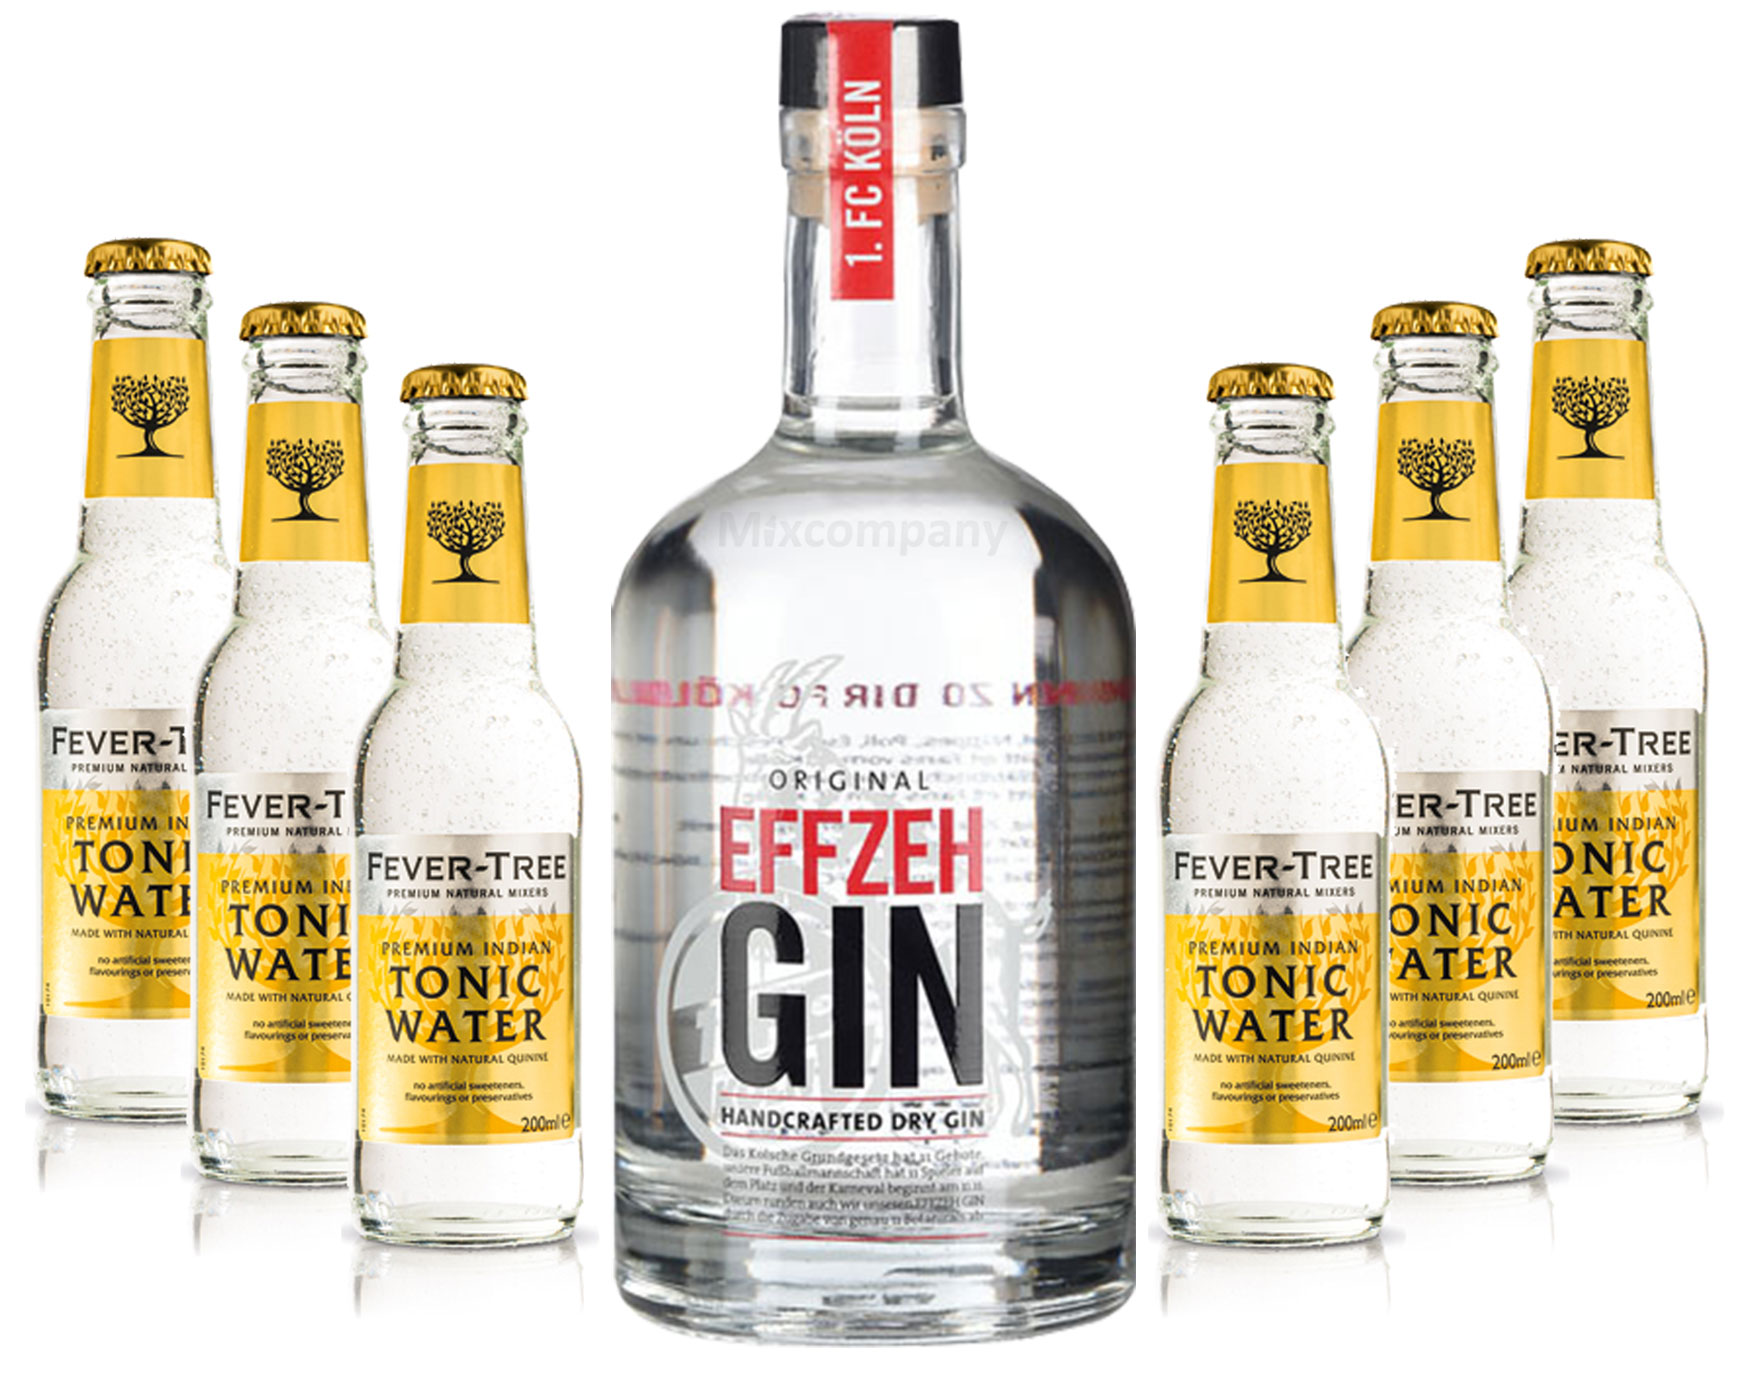 Effzeh Handcrafted Dry Gin 0,5l 500ml (42% Vol) + 6xFever-Tree Premium Indian Tonic Water 0,2l MEHRWEG inkl. Pfand- [Enthält Sulfite]